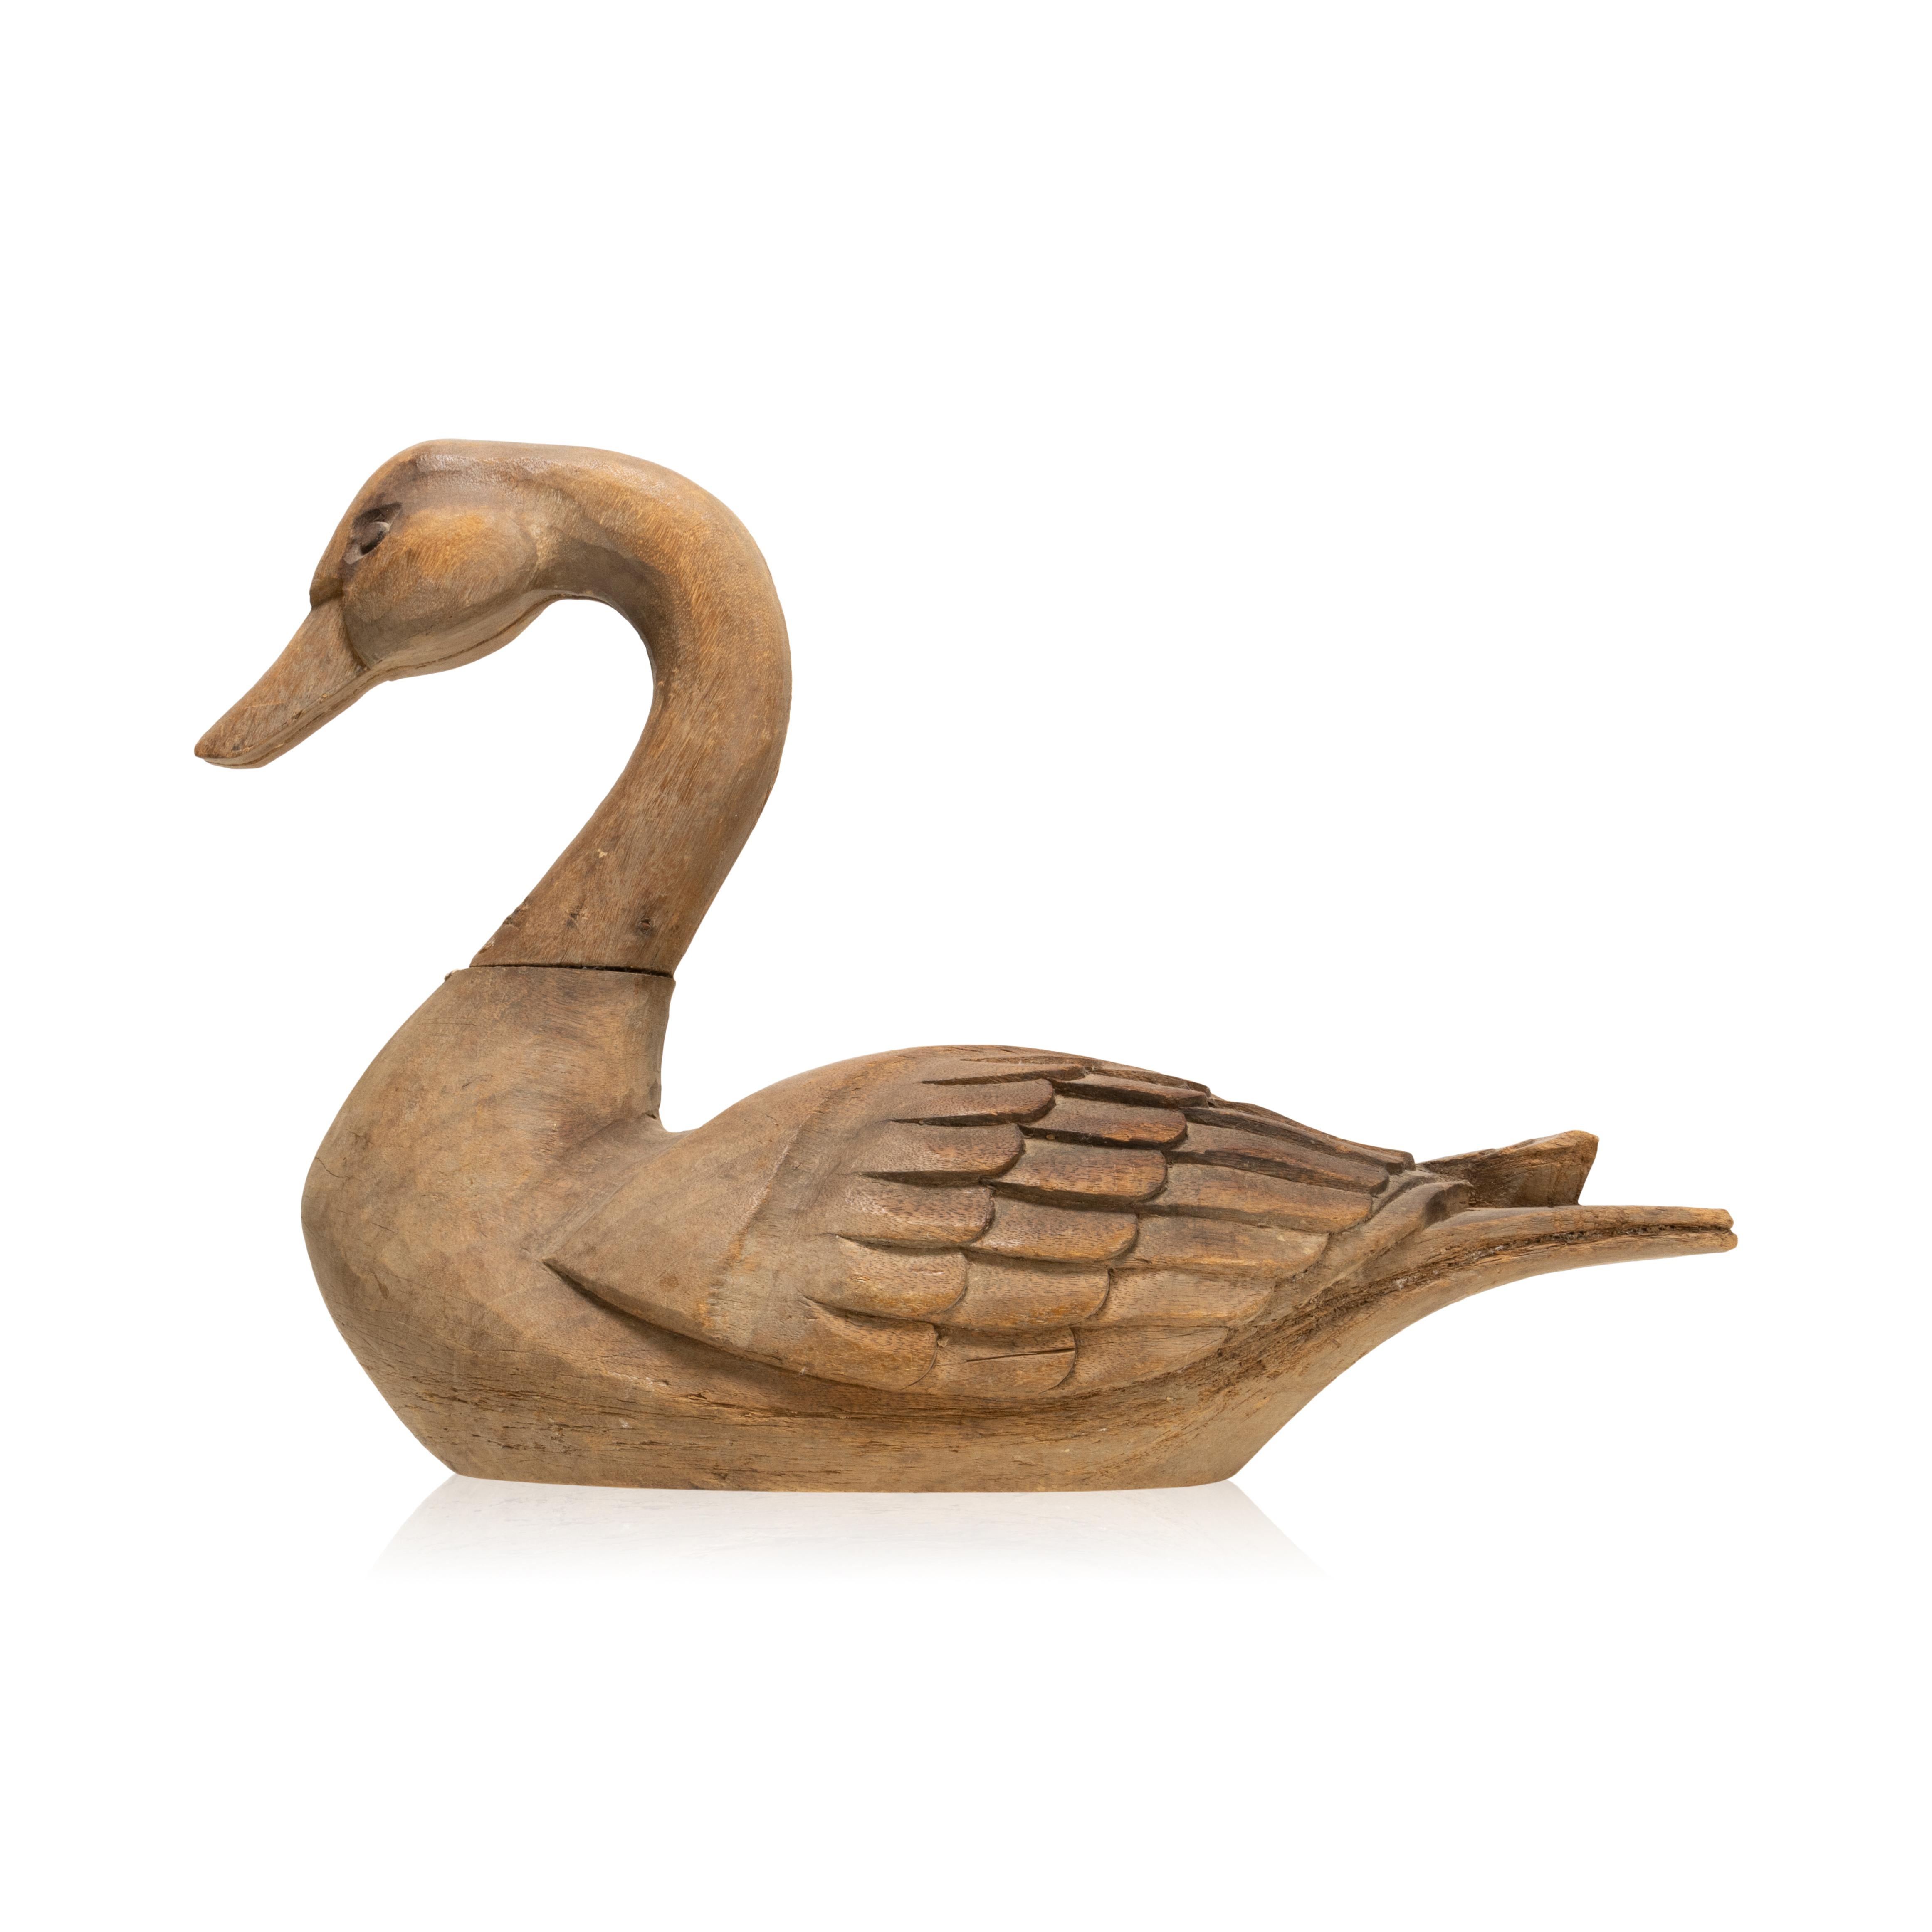 Very nice 19th Century carved swan decoy, unpainted. Very nice, natural looking. Life size. 24